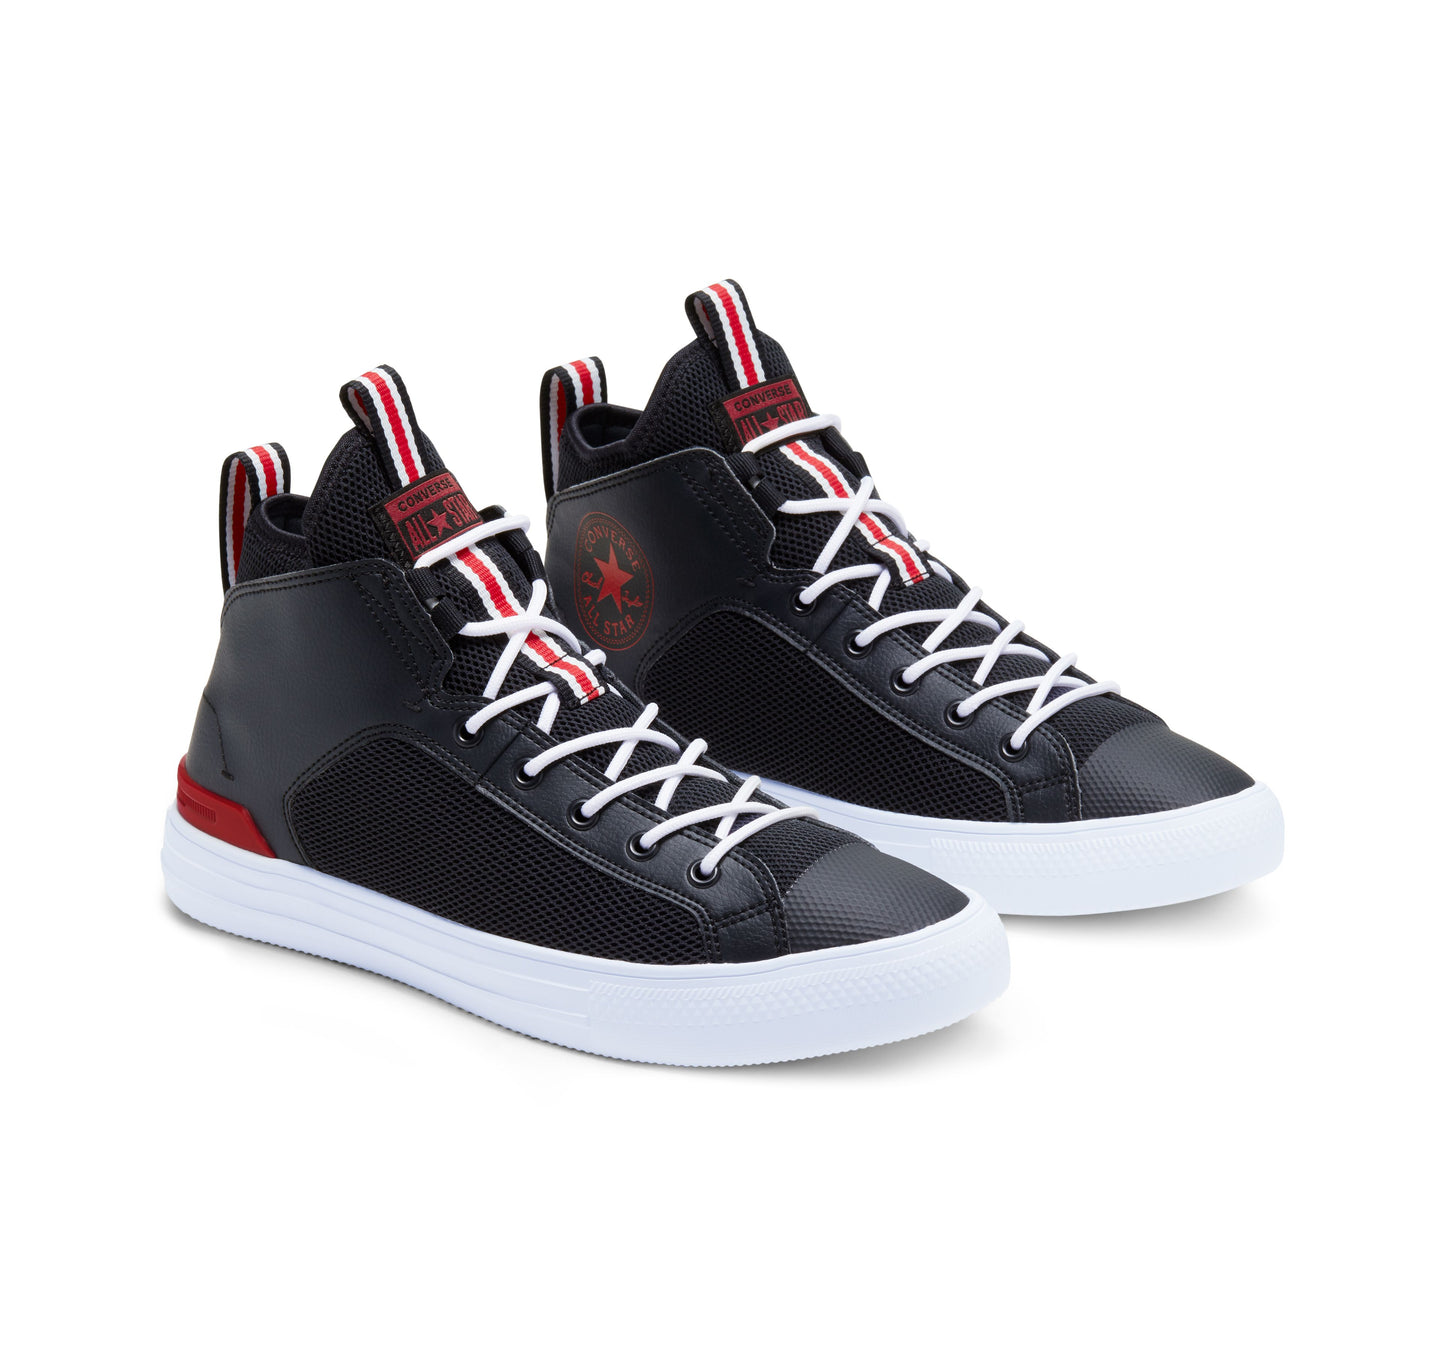 CONVERSE CHUCK TAYLOR ALL STAR ULTRA MID - BLACK UNIVERSITY RED/WHITE